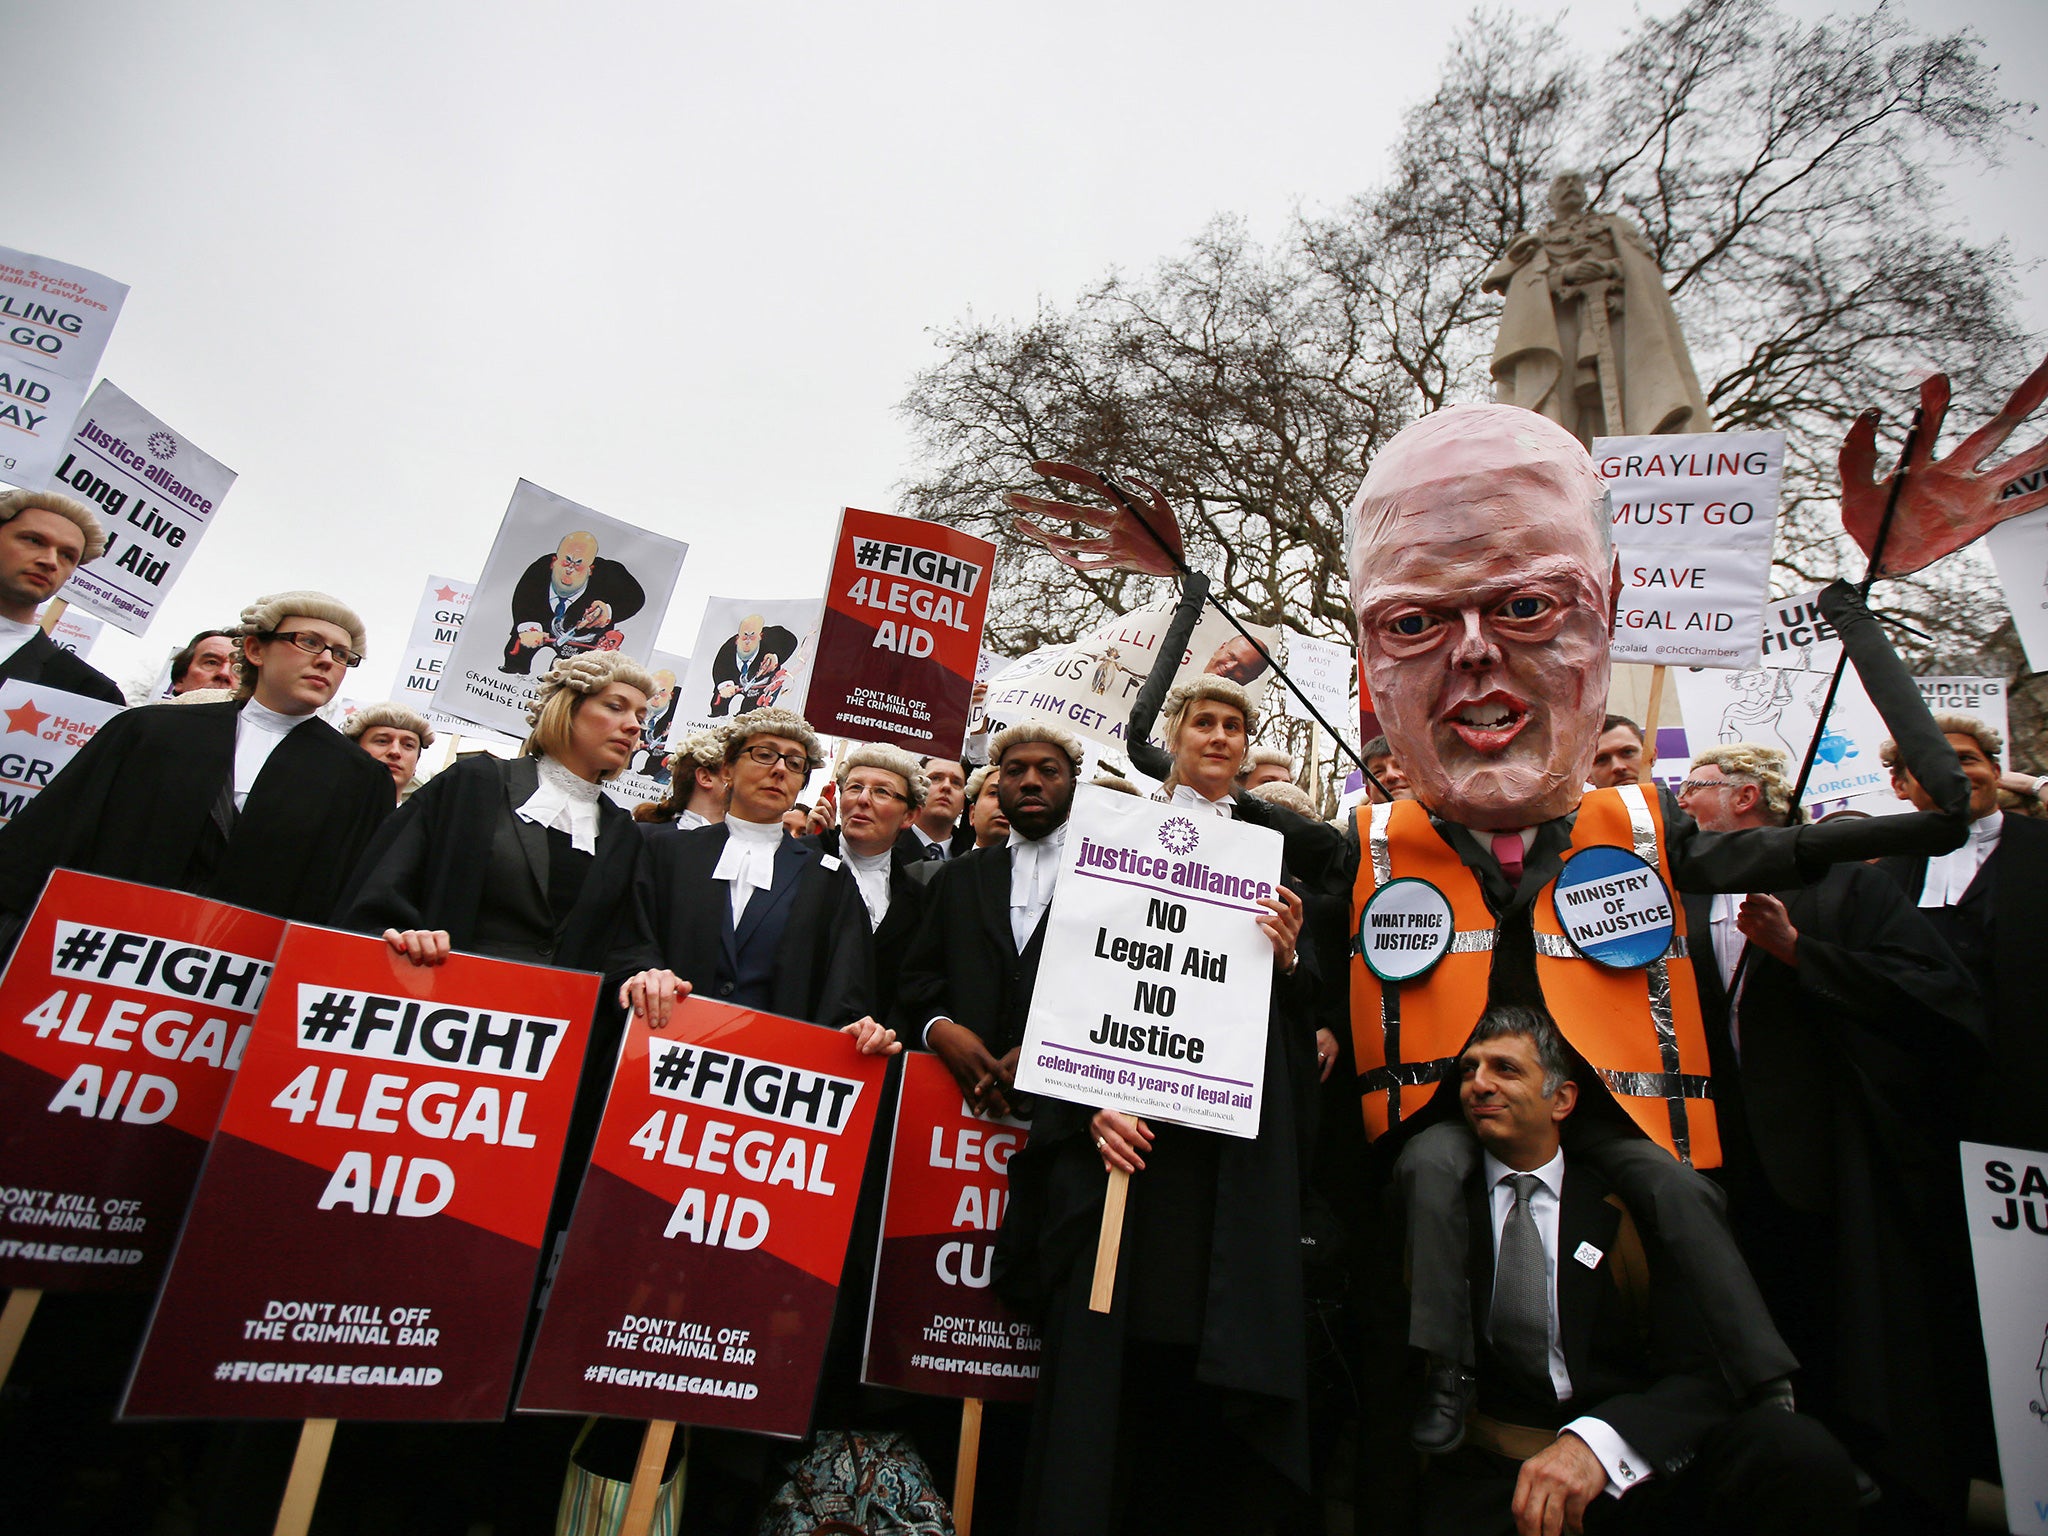 Lawyers have been protesting against sweeping cuts to legal aid fees